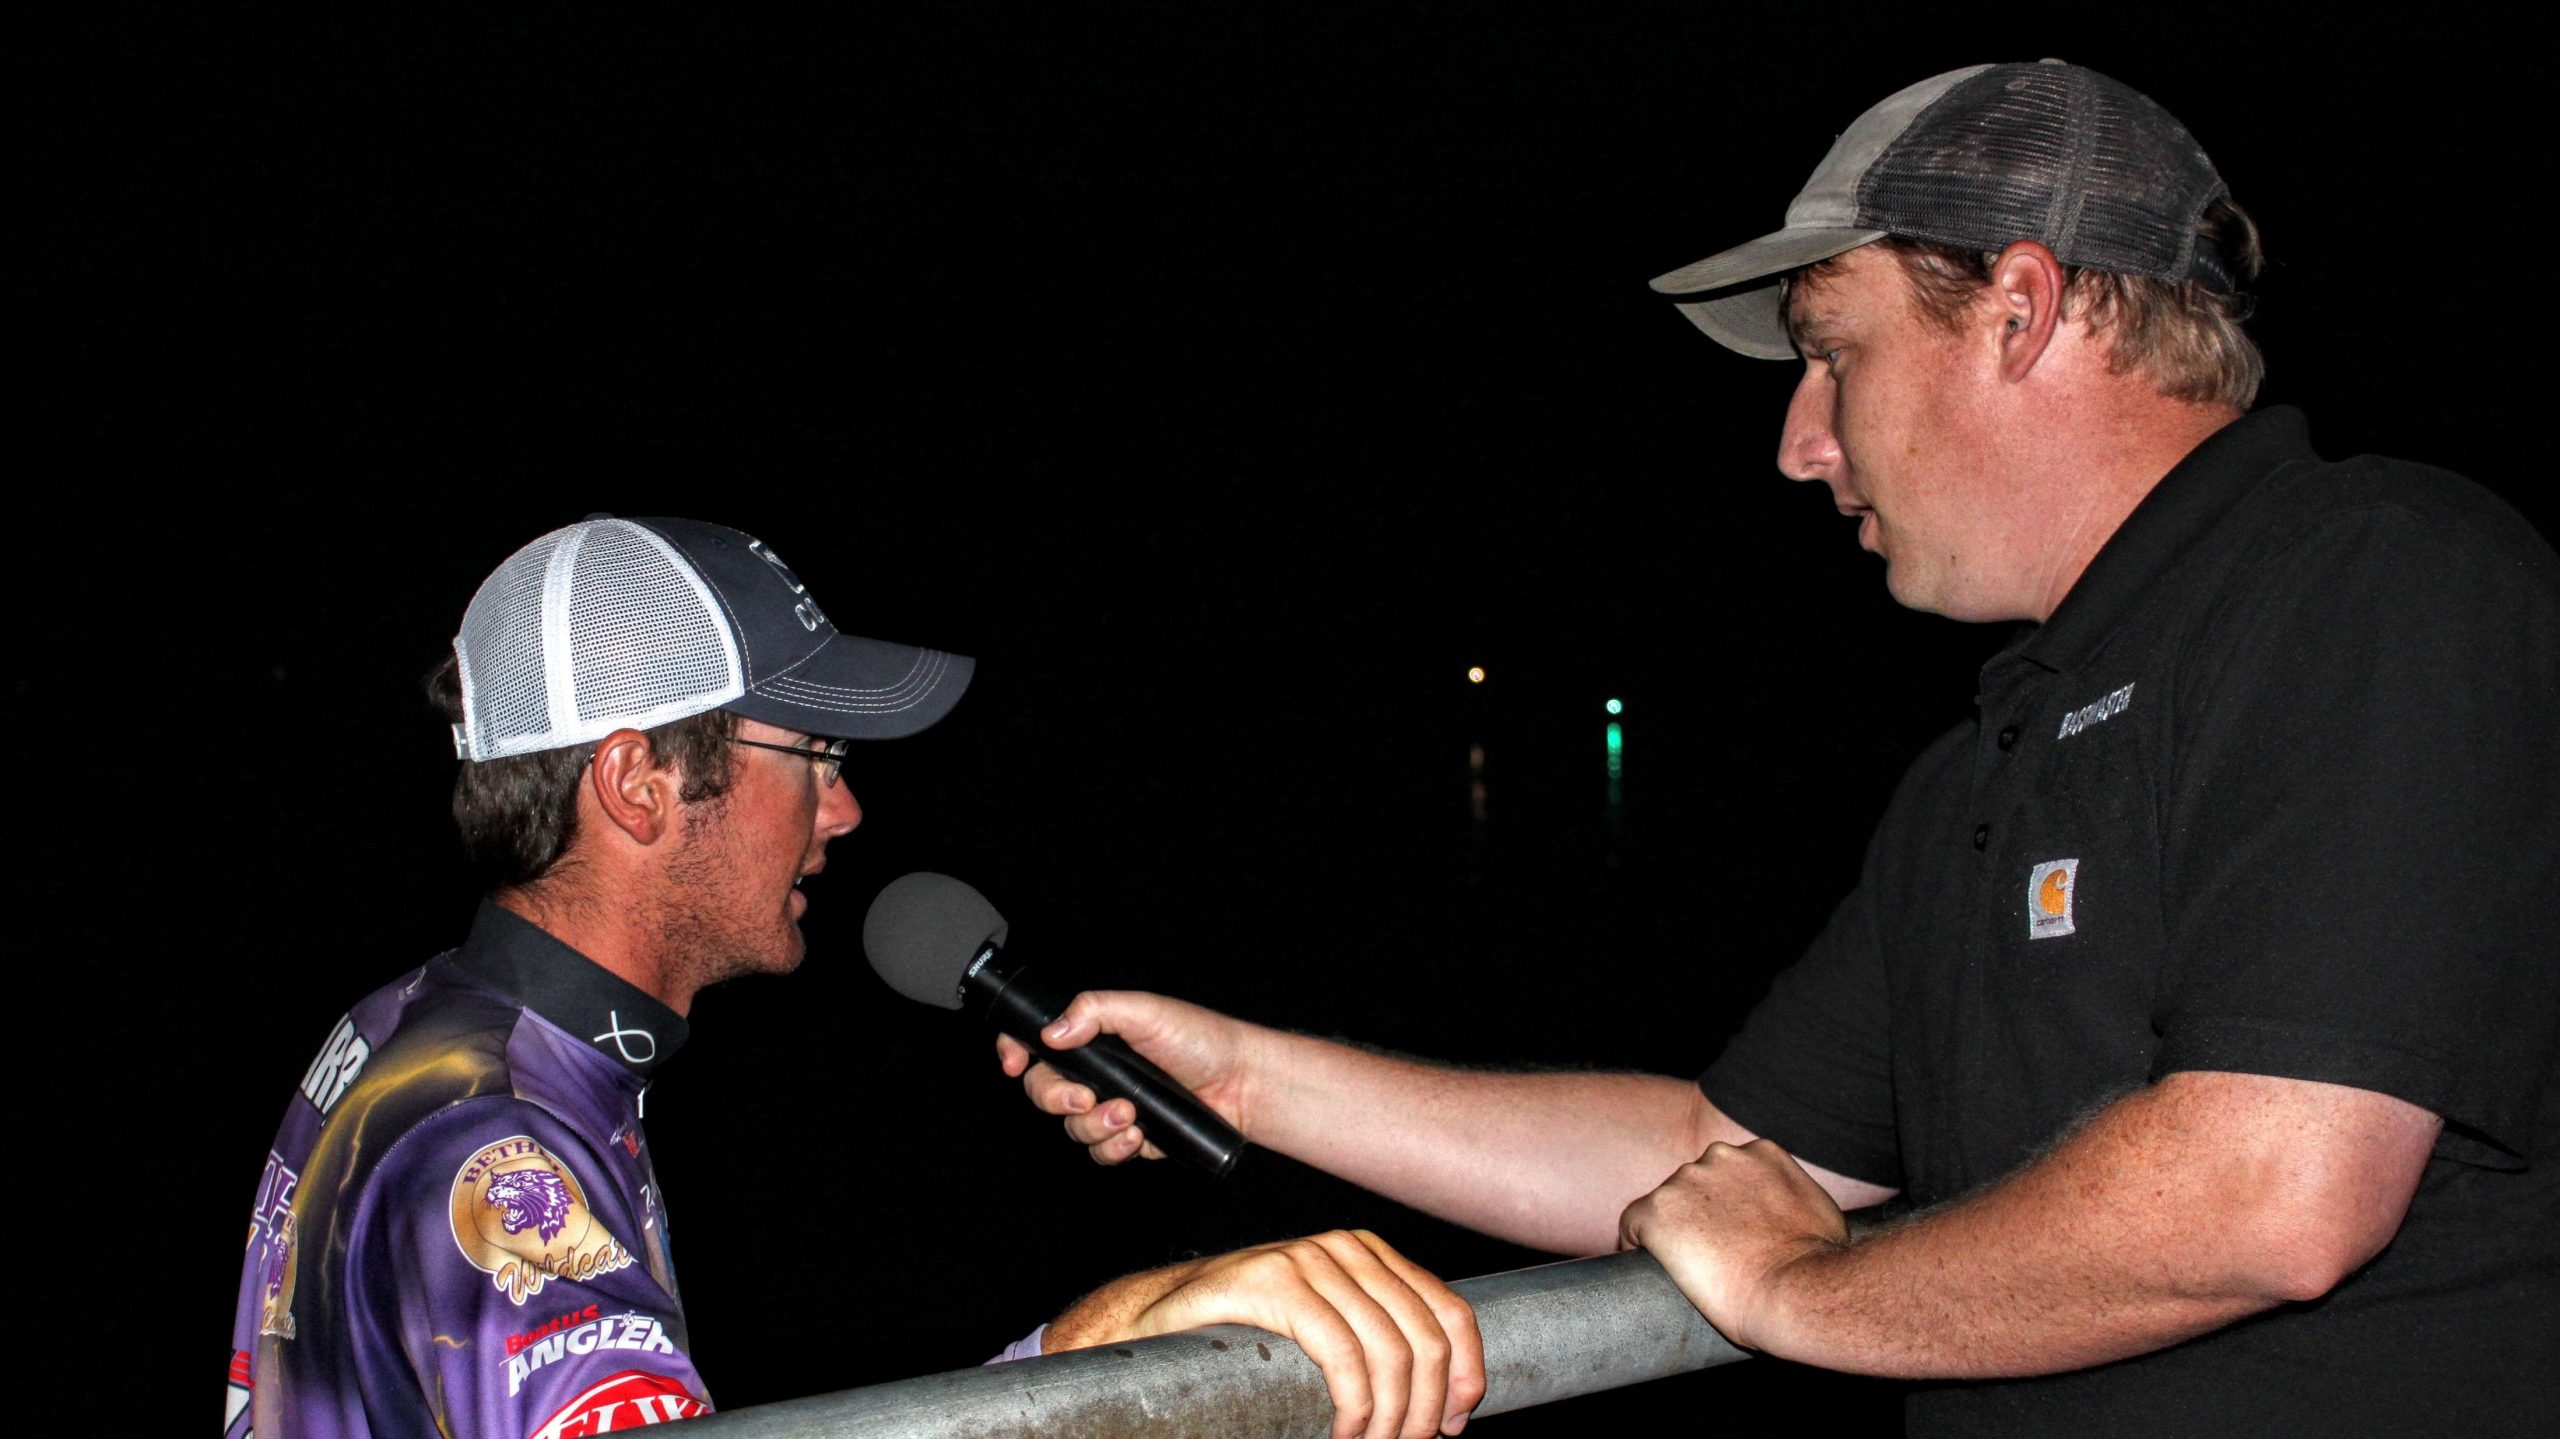 Then he spoke with tournament director Hank Weldon about the experience of fishing in this level of an event and the chance to make the Bassmaster Classic.